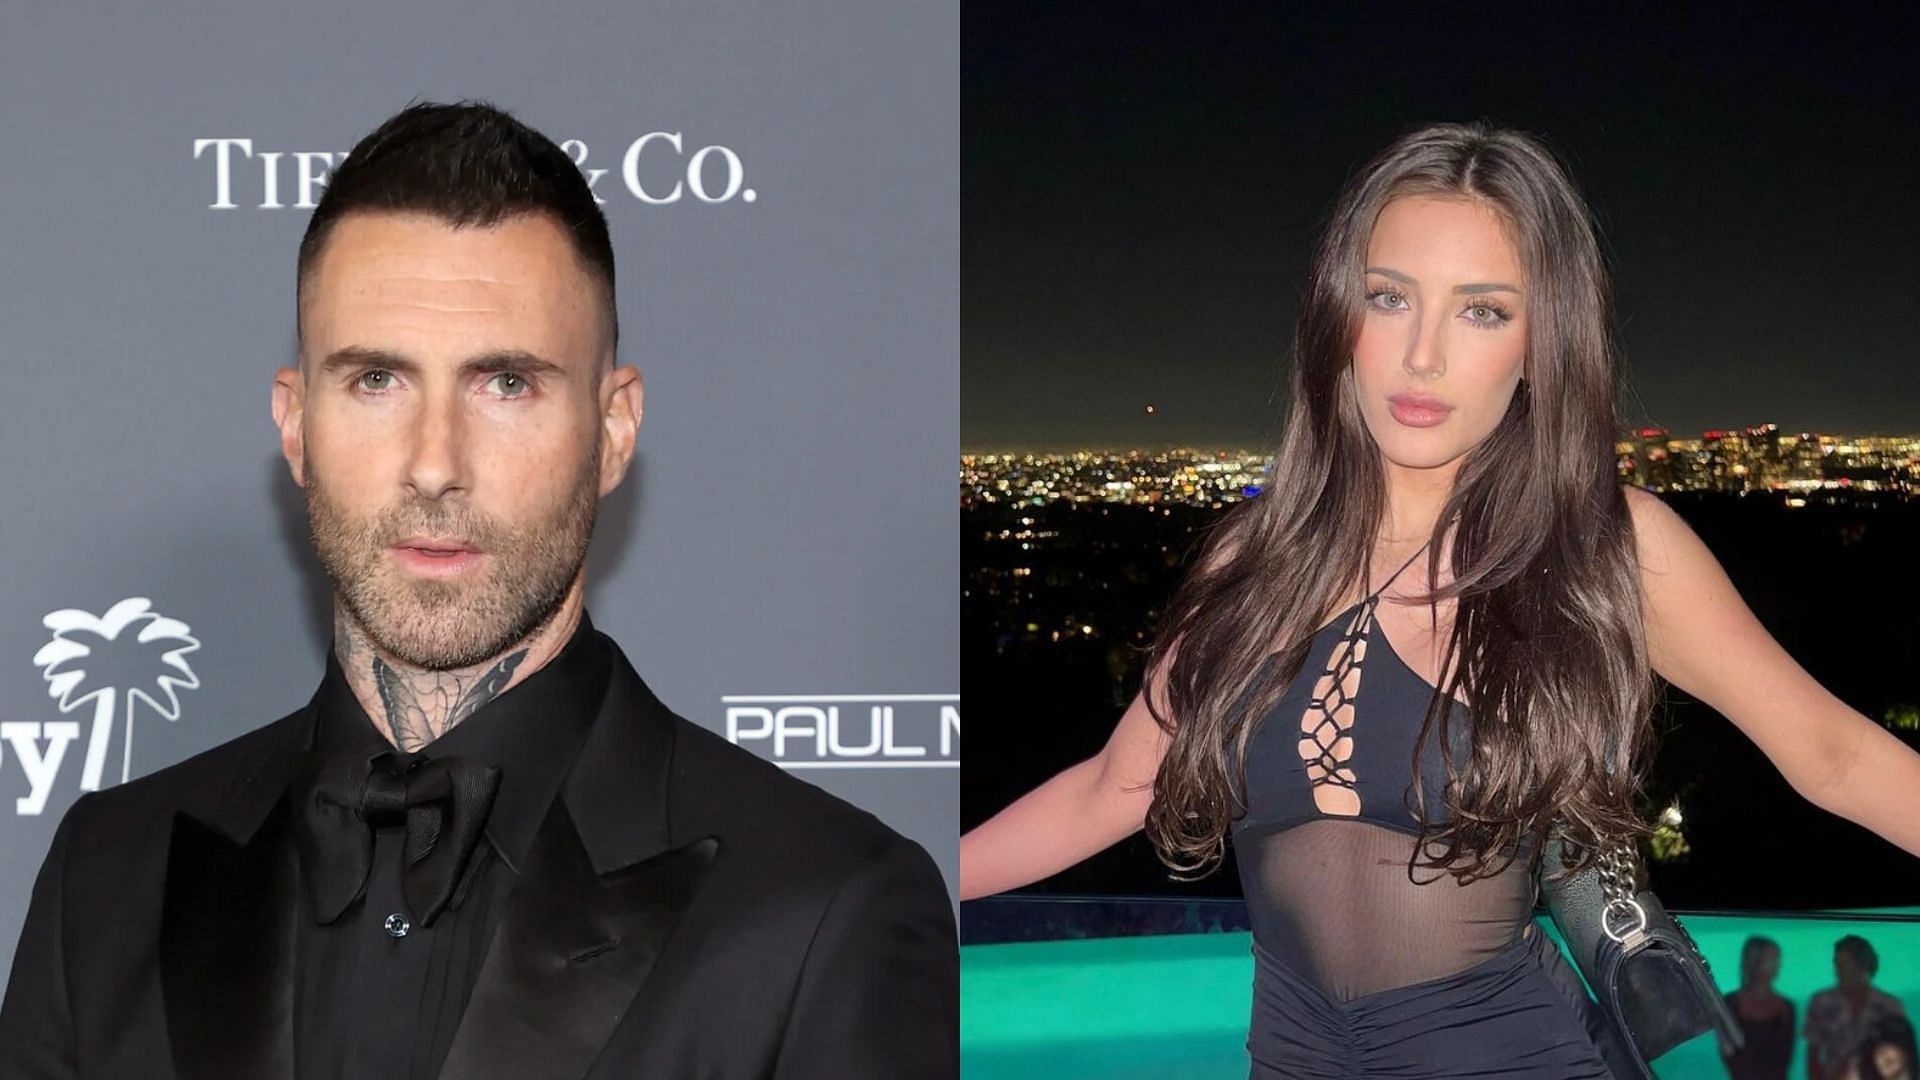 (left) Adam Levine speaks out about alledged (right) Sumner Stroh cheating scandal. (Images via Amy Sussman/Getty Images and Instagram/@sumnerstroh)